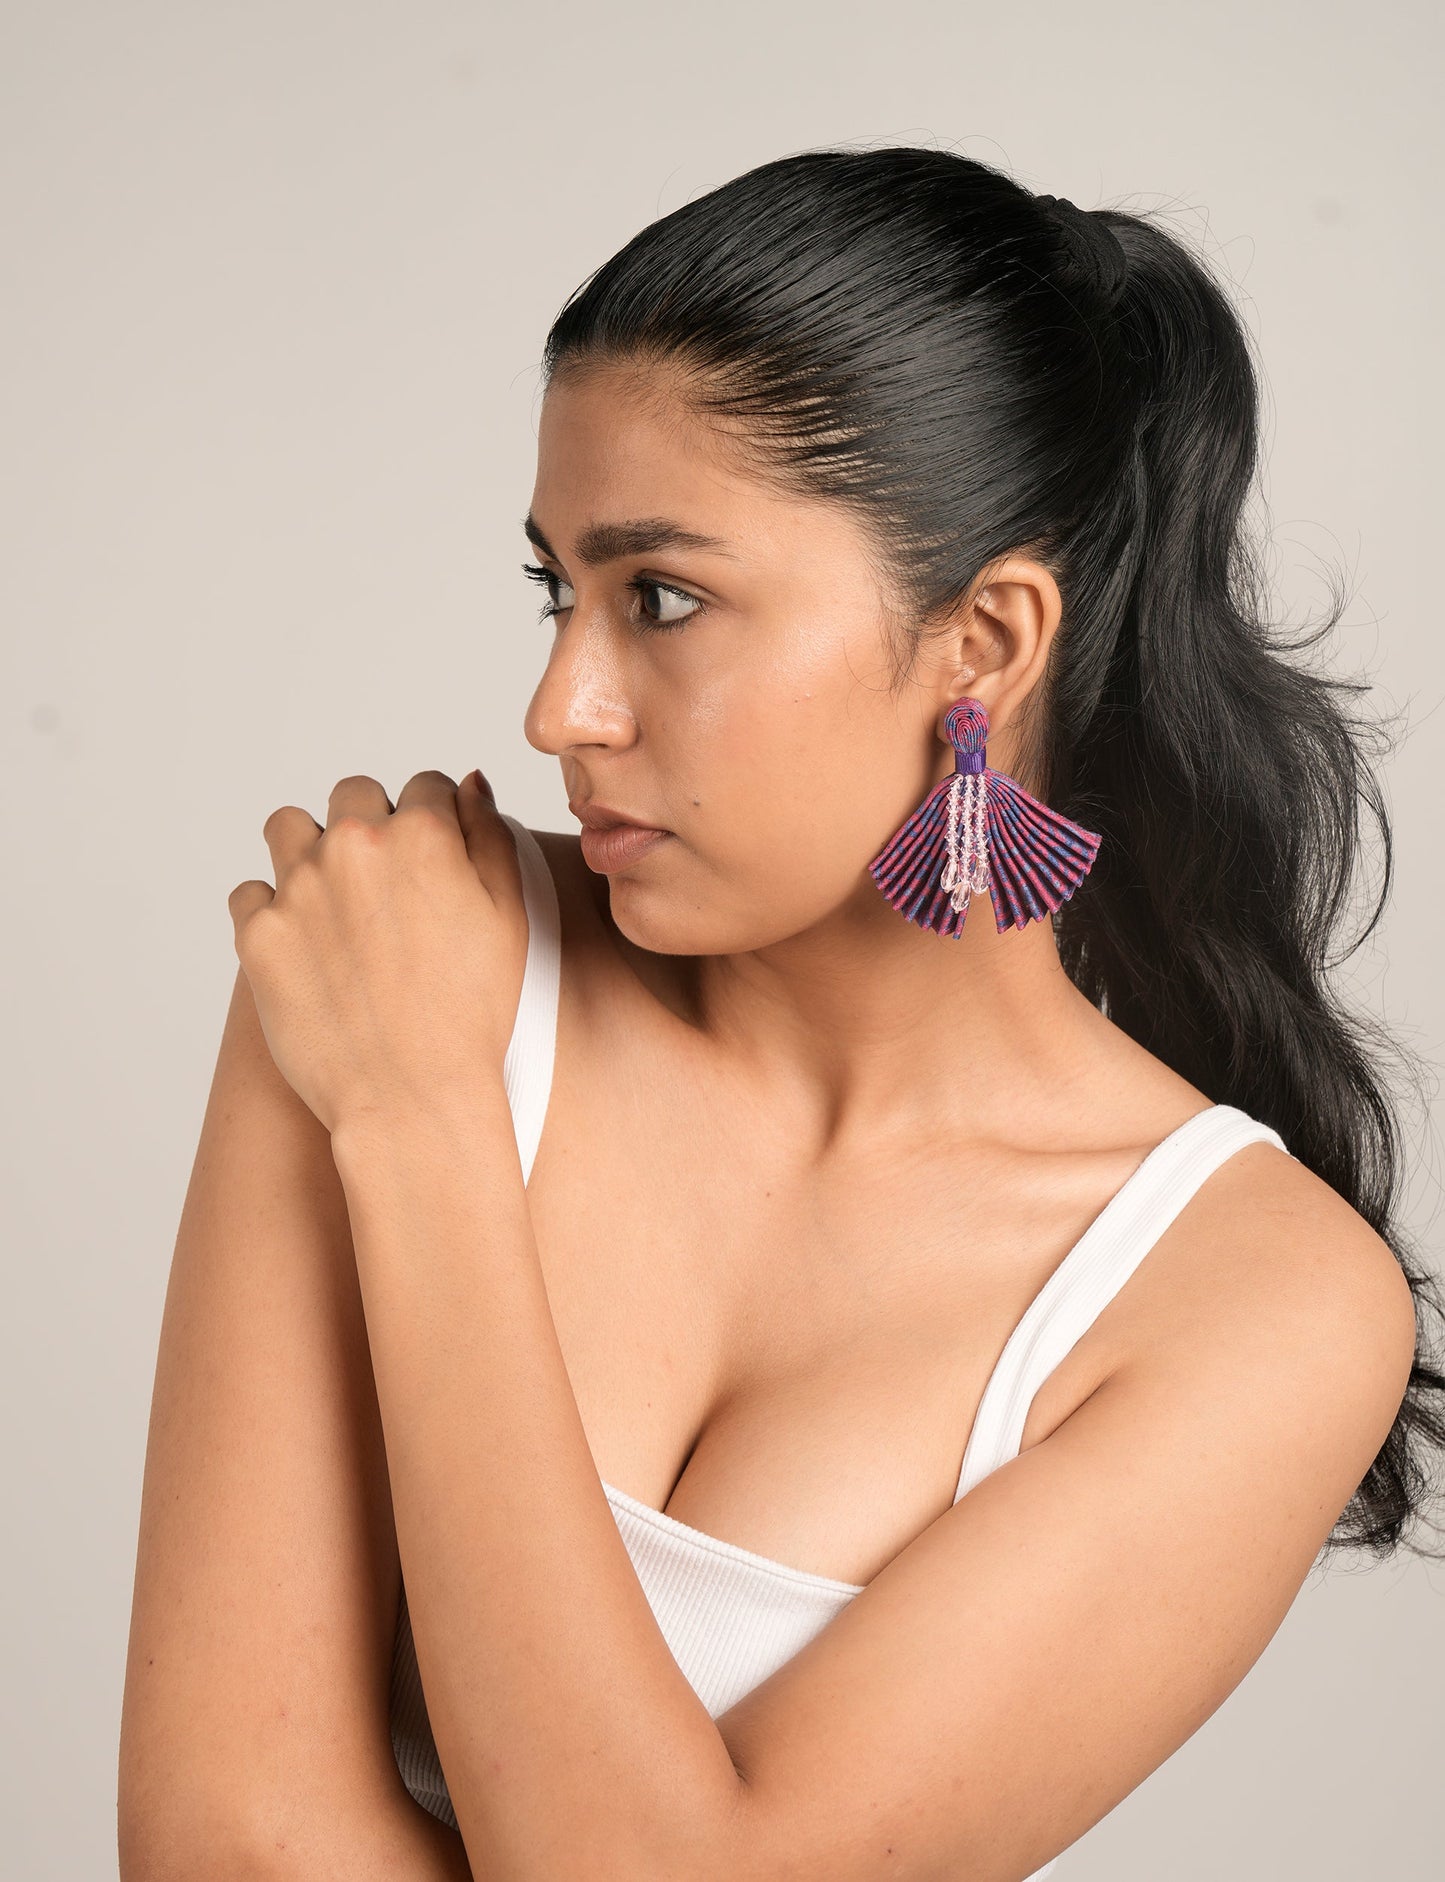 Elevate your look with our PLEATED EARRINGS – embellished with a beaded dangler, diamond-shaped metallic plate, and hook fastening. Crafted with innovative heat setting techniques on pre-loved saris, these earrings showcase ethical clothing, green fashion, and zero waste fashion. Hypoallergy tested metal hooks, nickel, and lead-free for a conscious and stylish accessory.